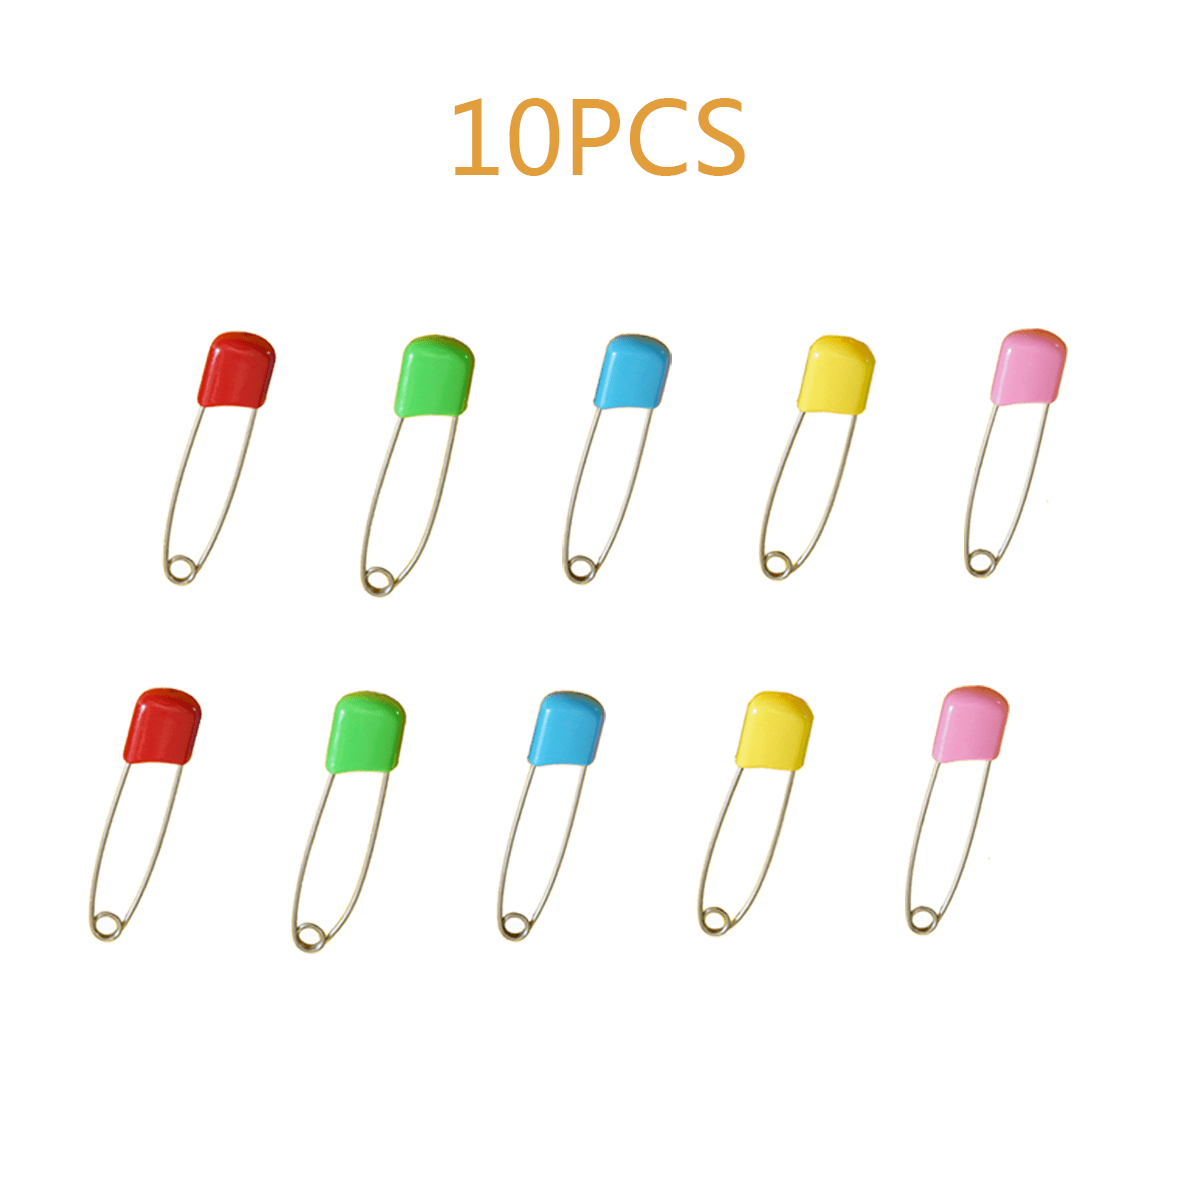 84pcs Plastic Safety Pins, BetterJonny 2 inch Assorted Color Head Safety Pins Locking Baby Cloth Diaper Nappy Pins for Quilting Locking Stitch